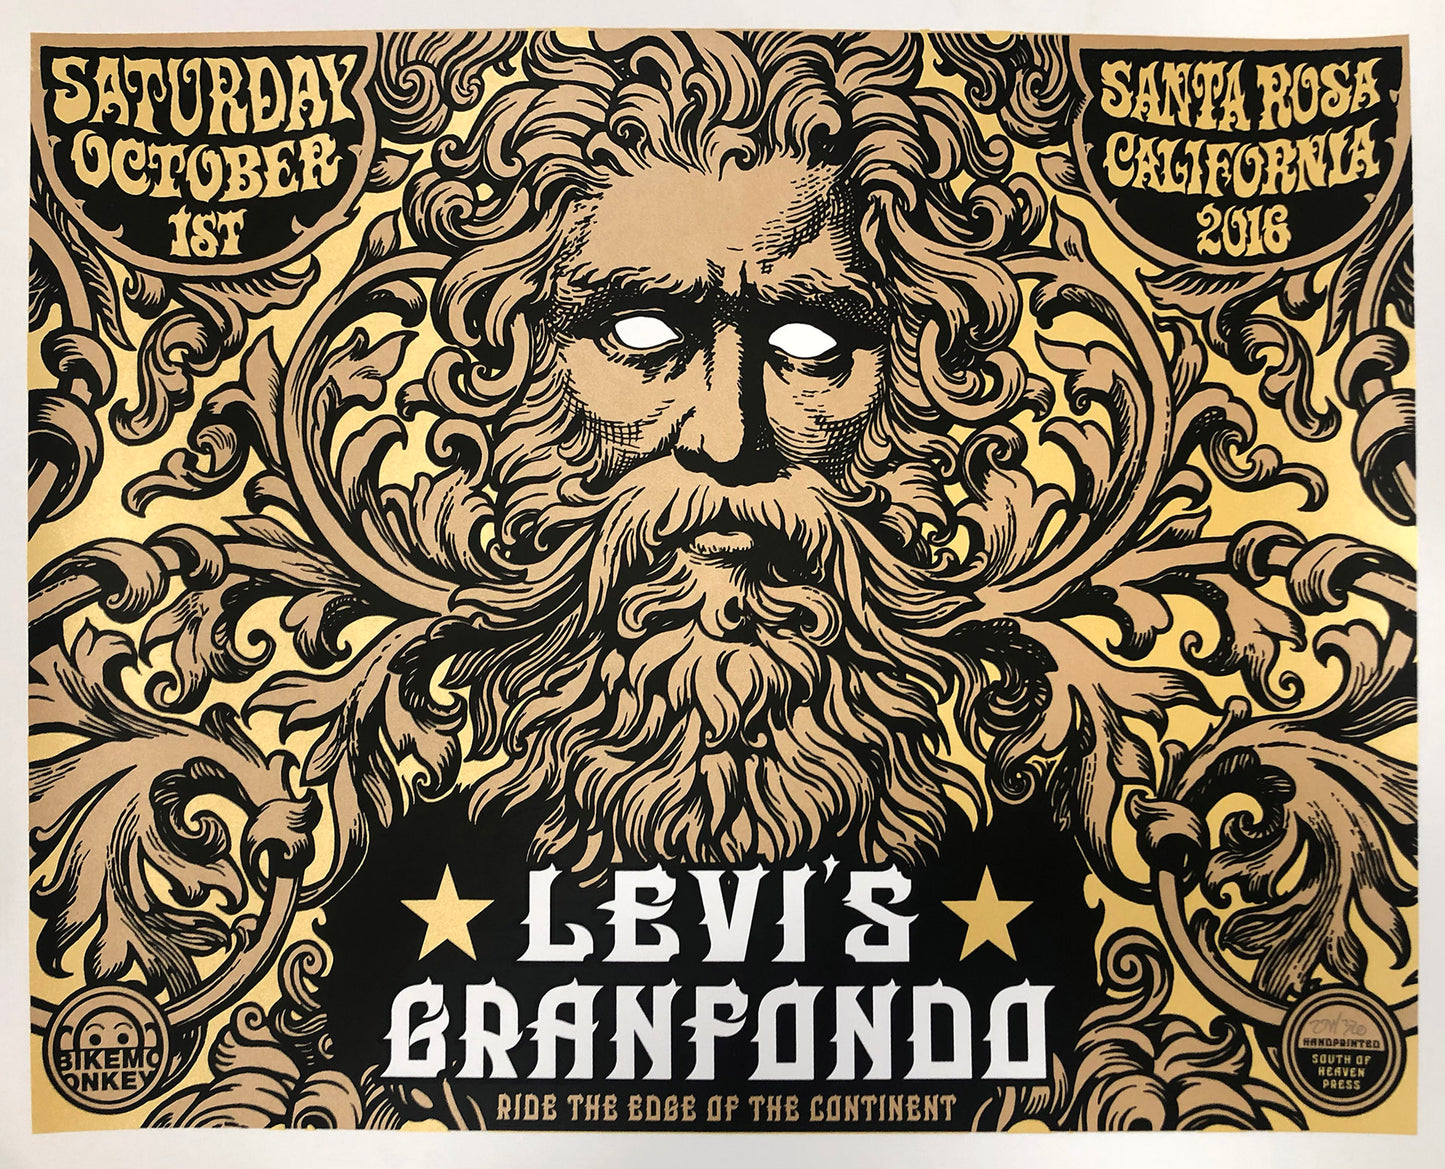 Previously Unreleased and Unseen Levi's GranFondo Event Poster